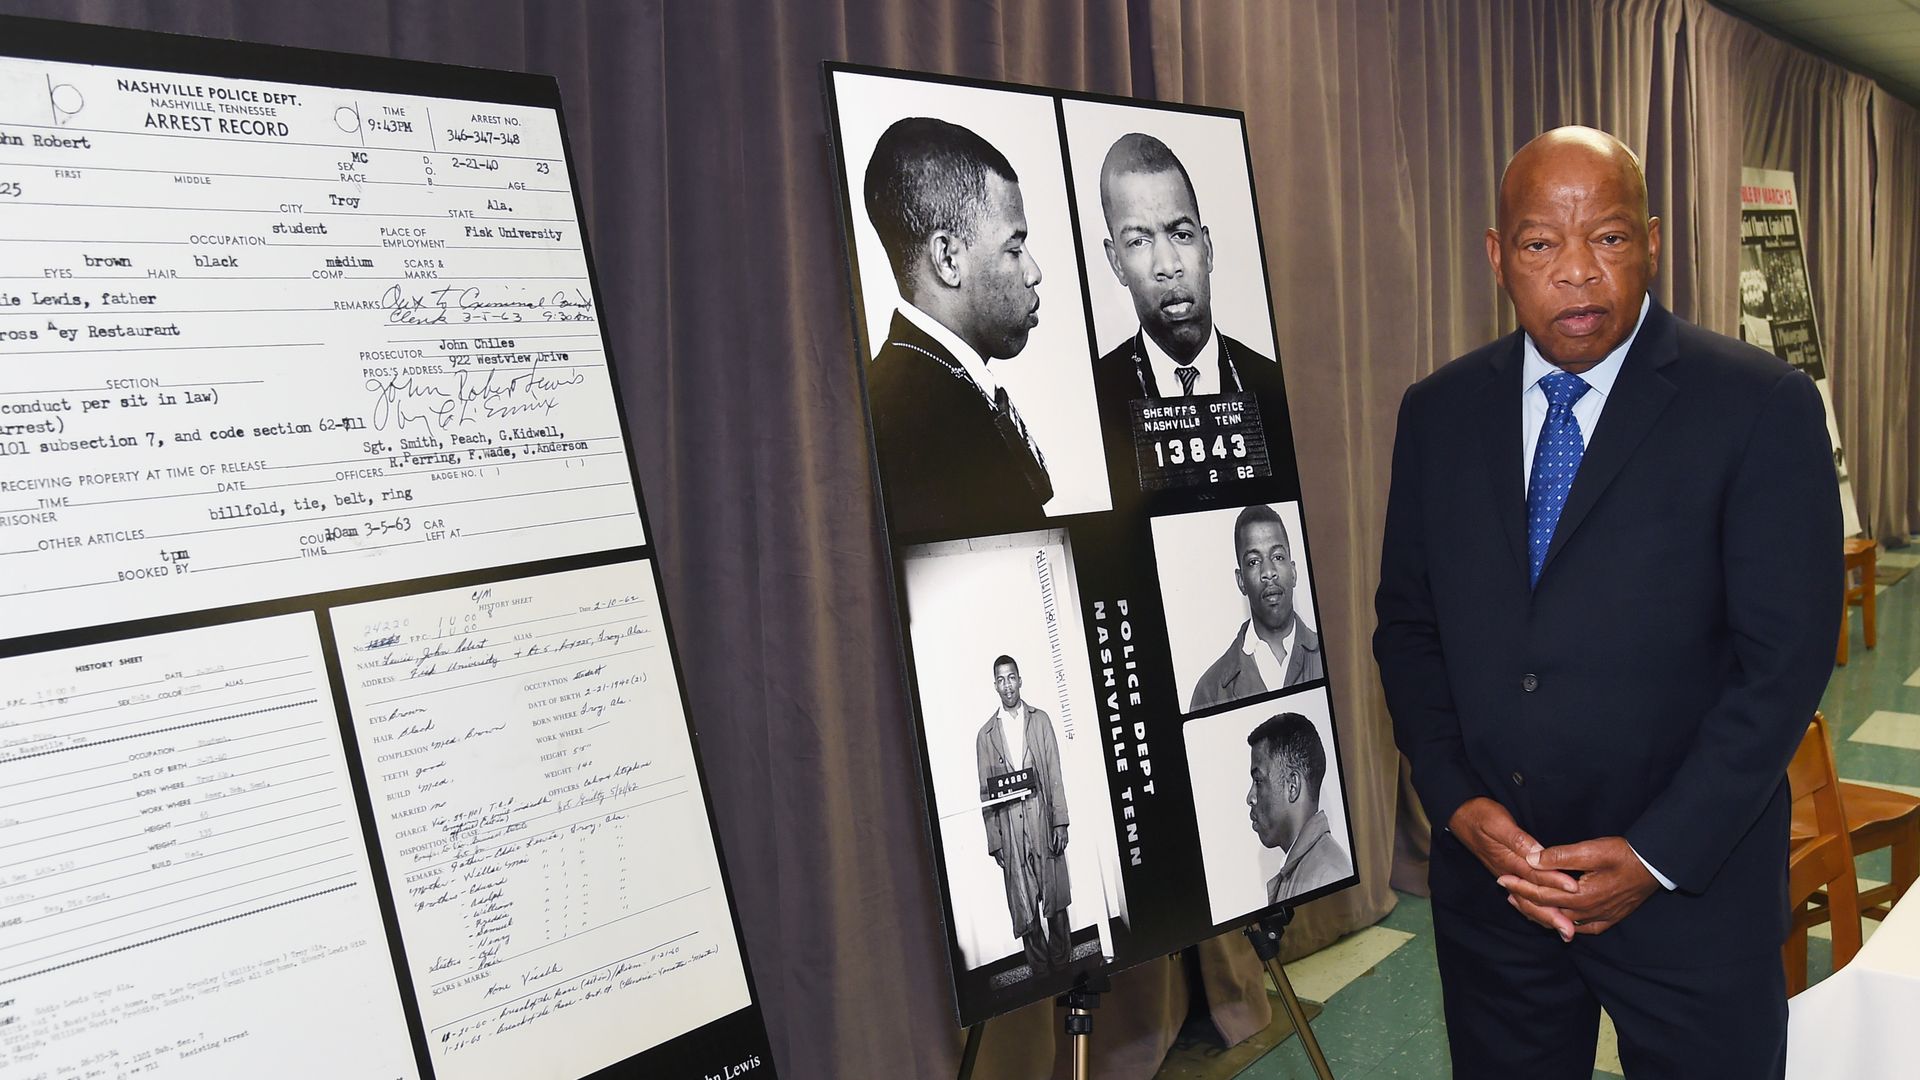 Rep. John Lewis views for the first time images and his arrest record for leading a nonviolent sit-in at Nashville's segreated lunch counters, March 5, 1963. 